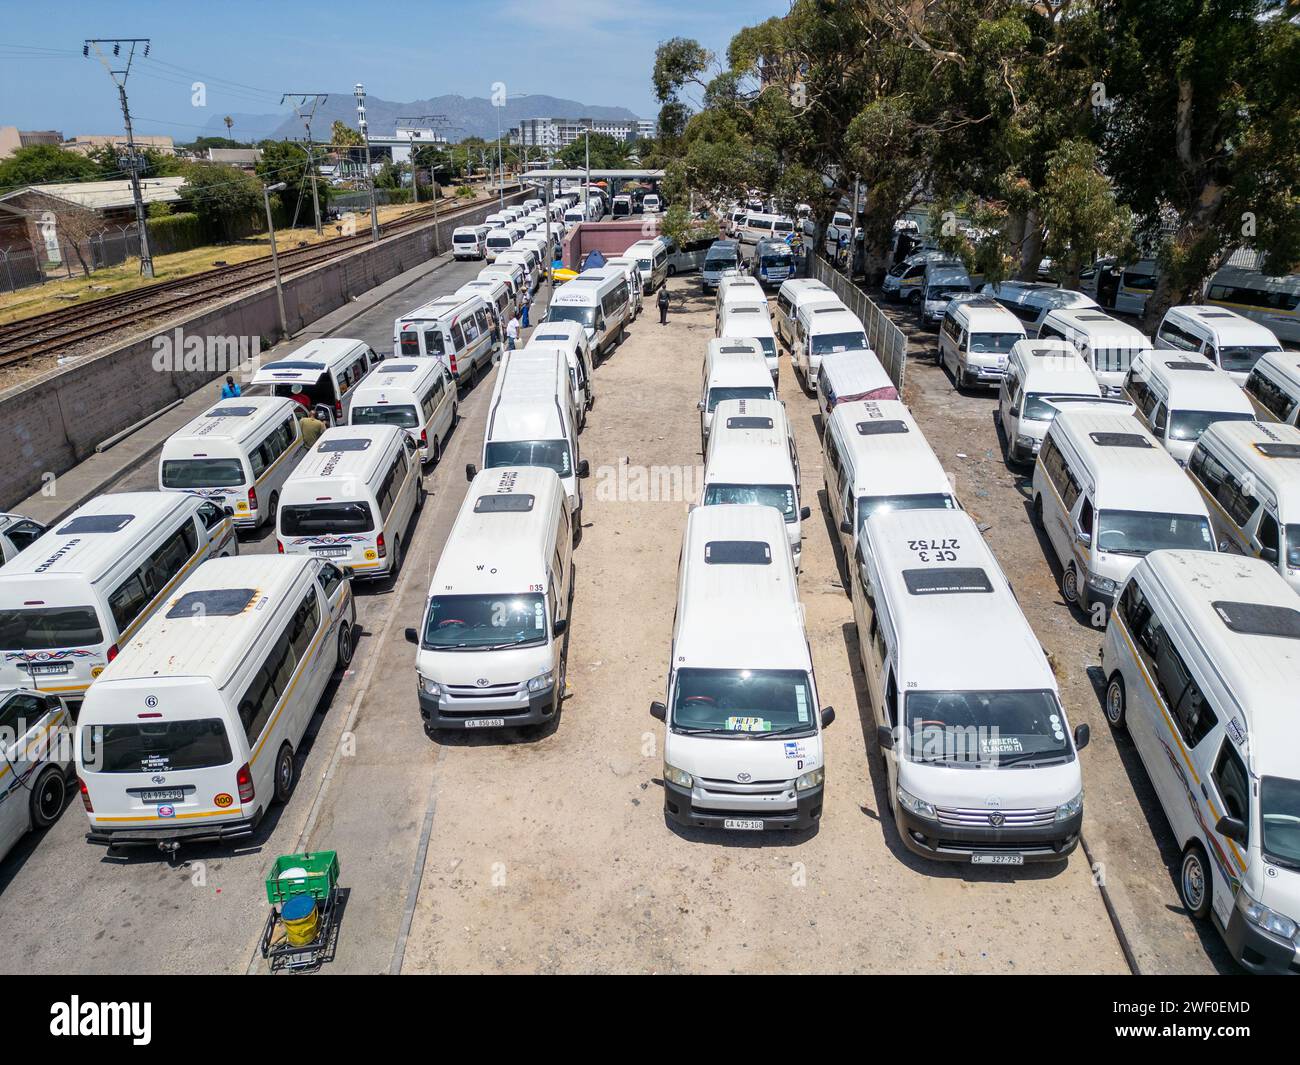 Minibus Taxi depot, Wynberg, Cape Town, South Africa 7708 Stock Photo